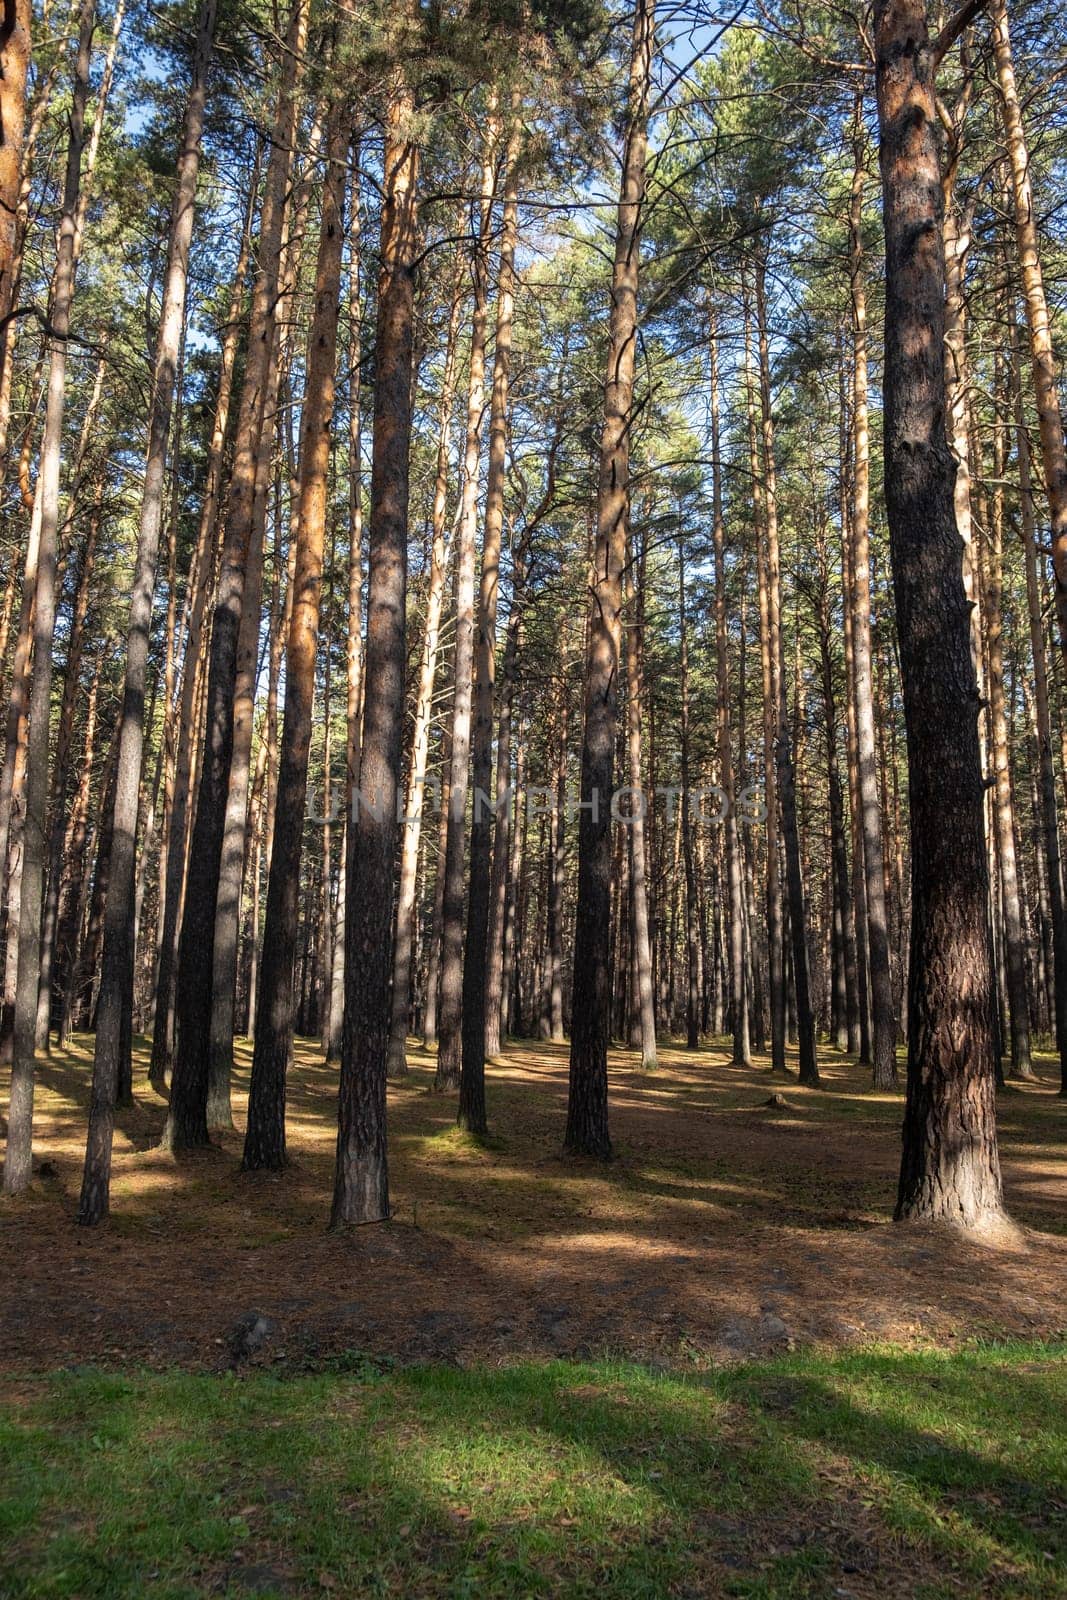 Forest background of pine trees. Spruce forest. Many vertical tree trunks on the ground. Park in a city in Russia.